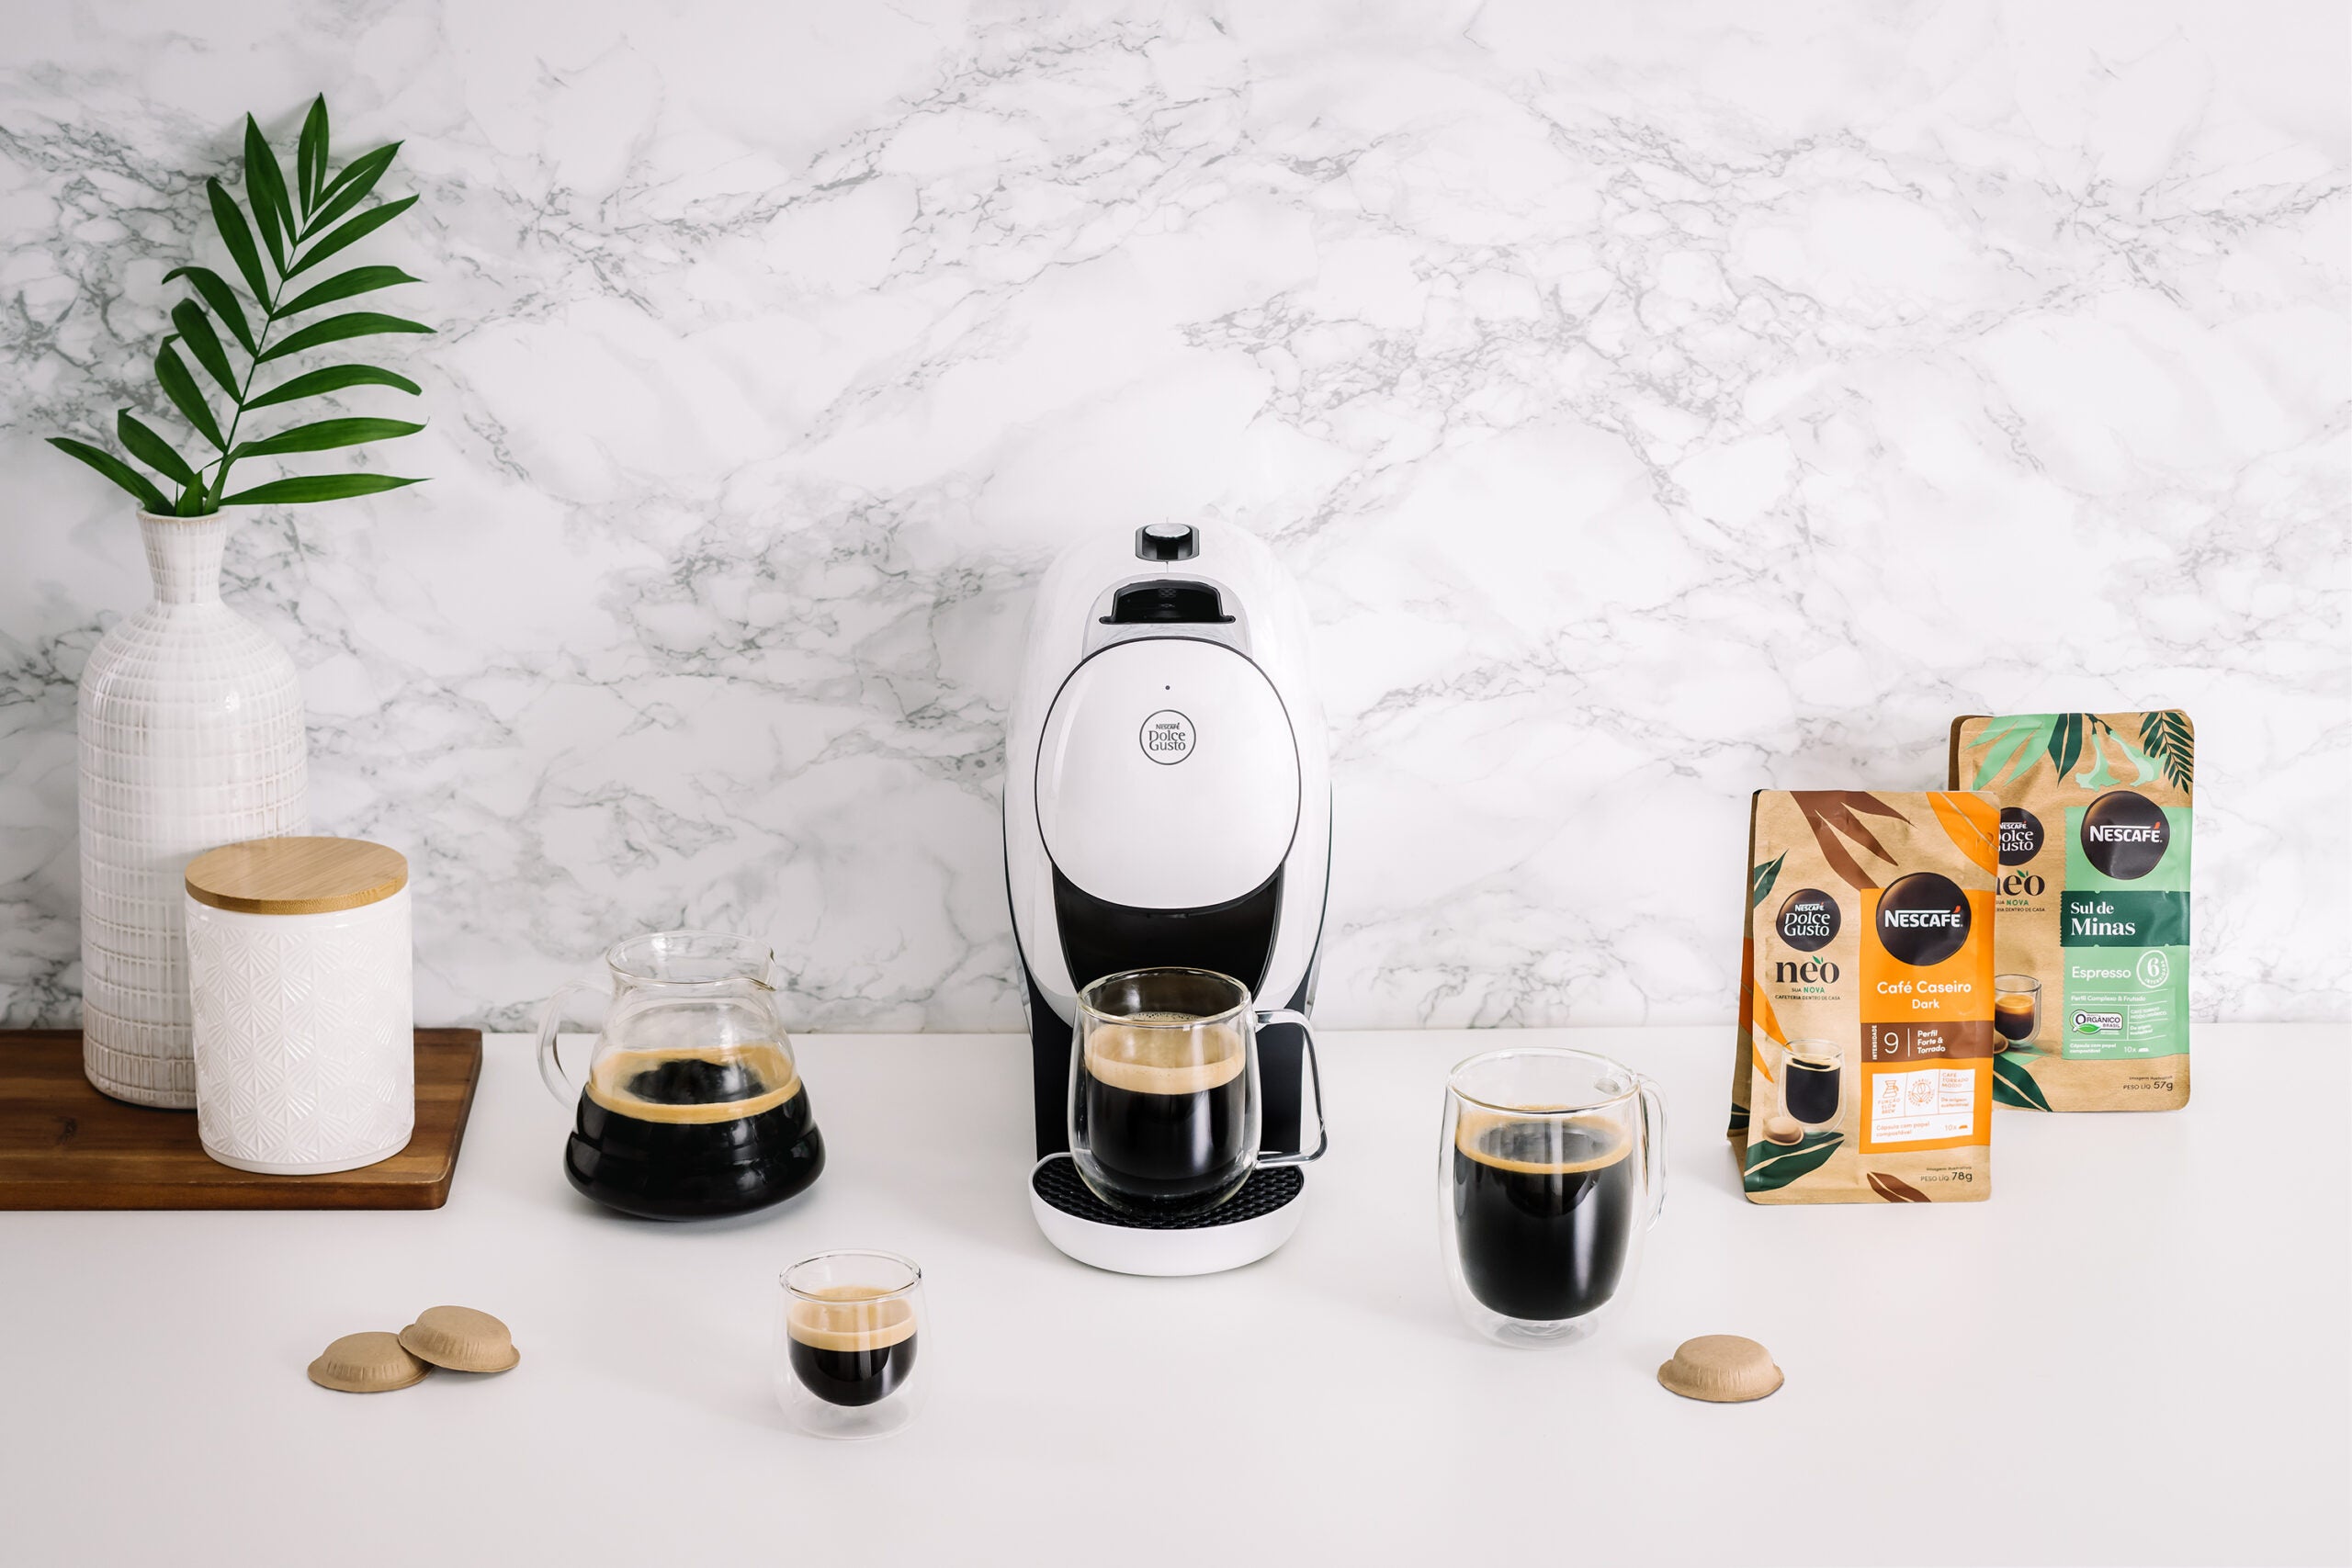 https://www.just-drinks.com/wp-content/uploads/sites/29/2022/11/Nestle-Dolce_Gusto_4-scaled.jpg